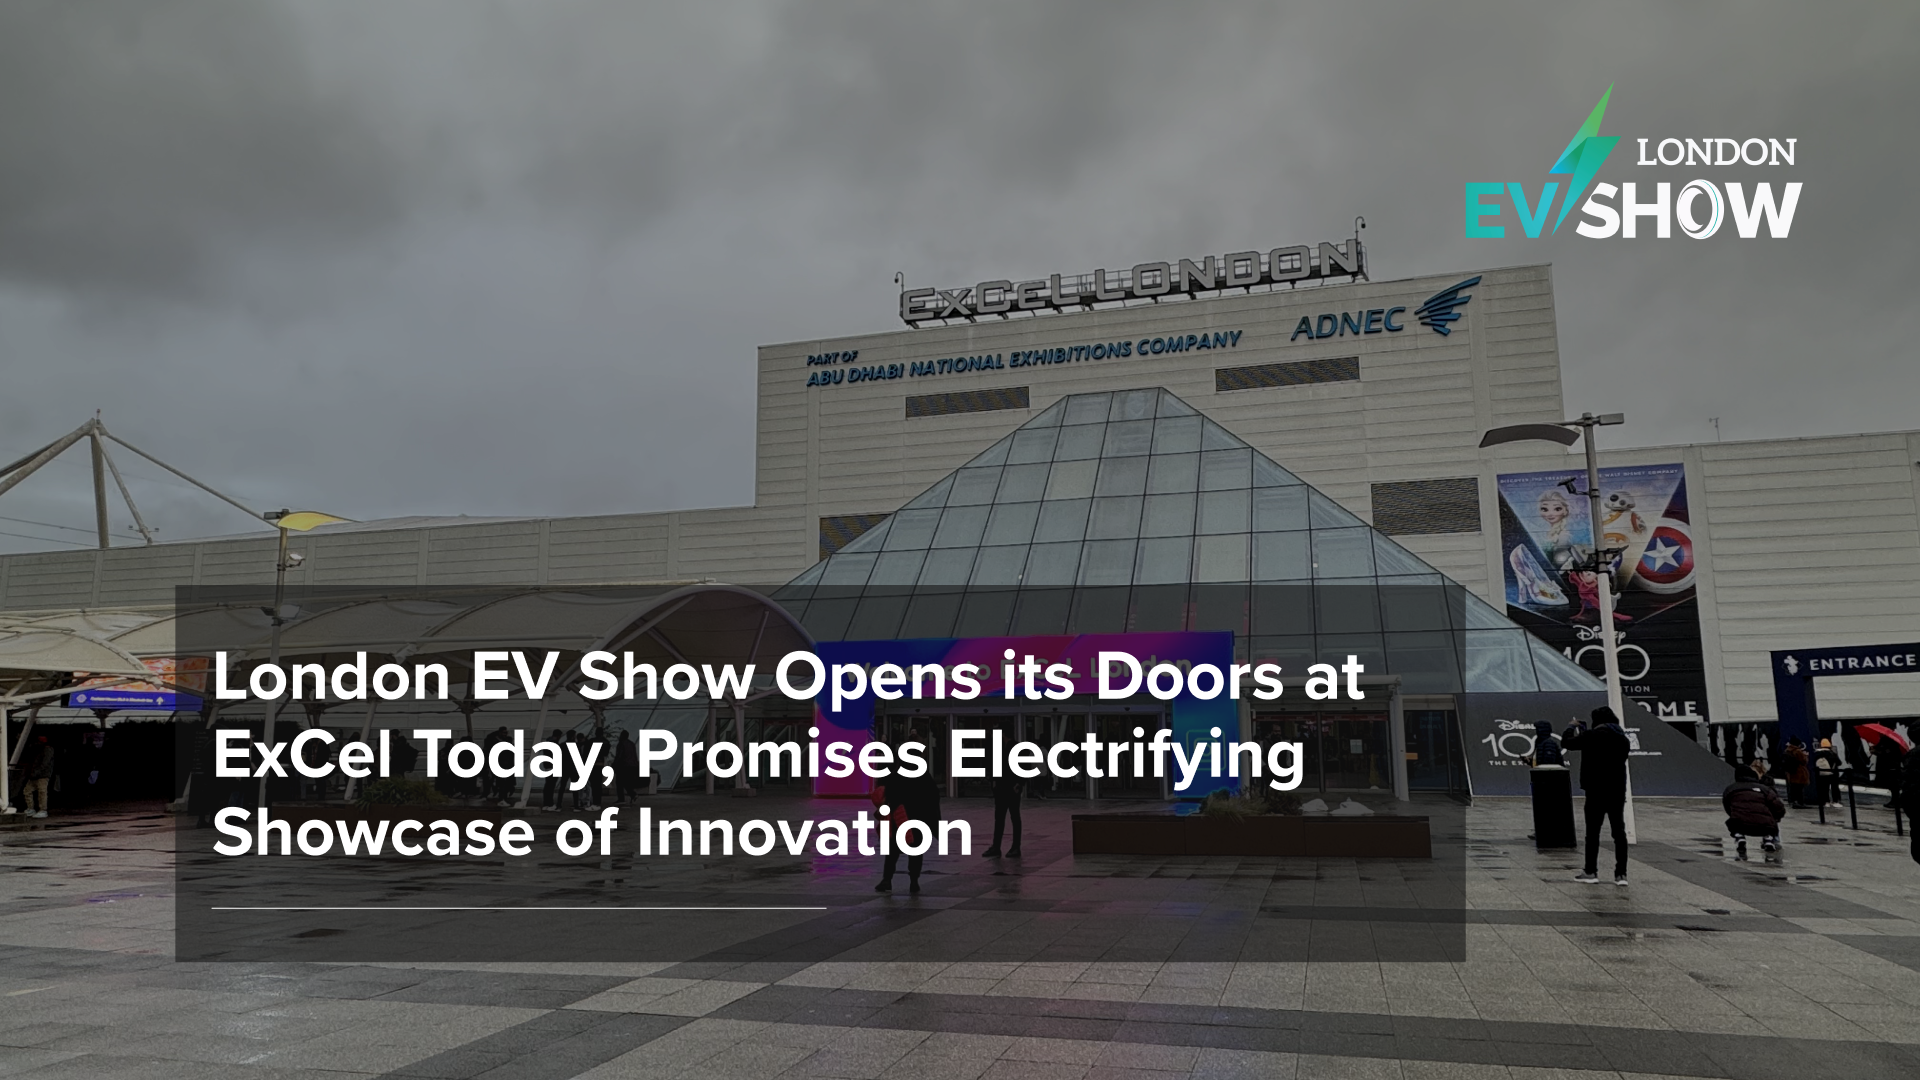 London EV Show Opens its Doors at ExCel Today, Promises Electrifying Showcase of Innovation